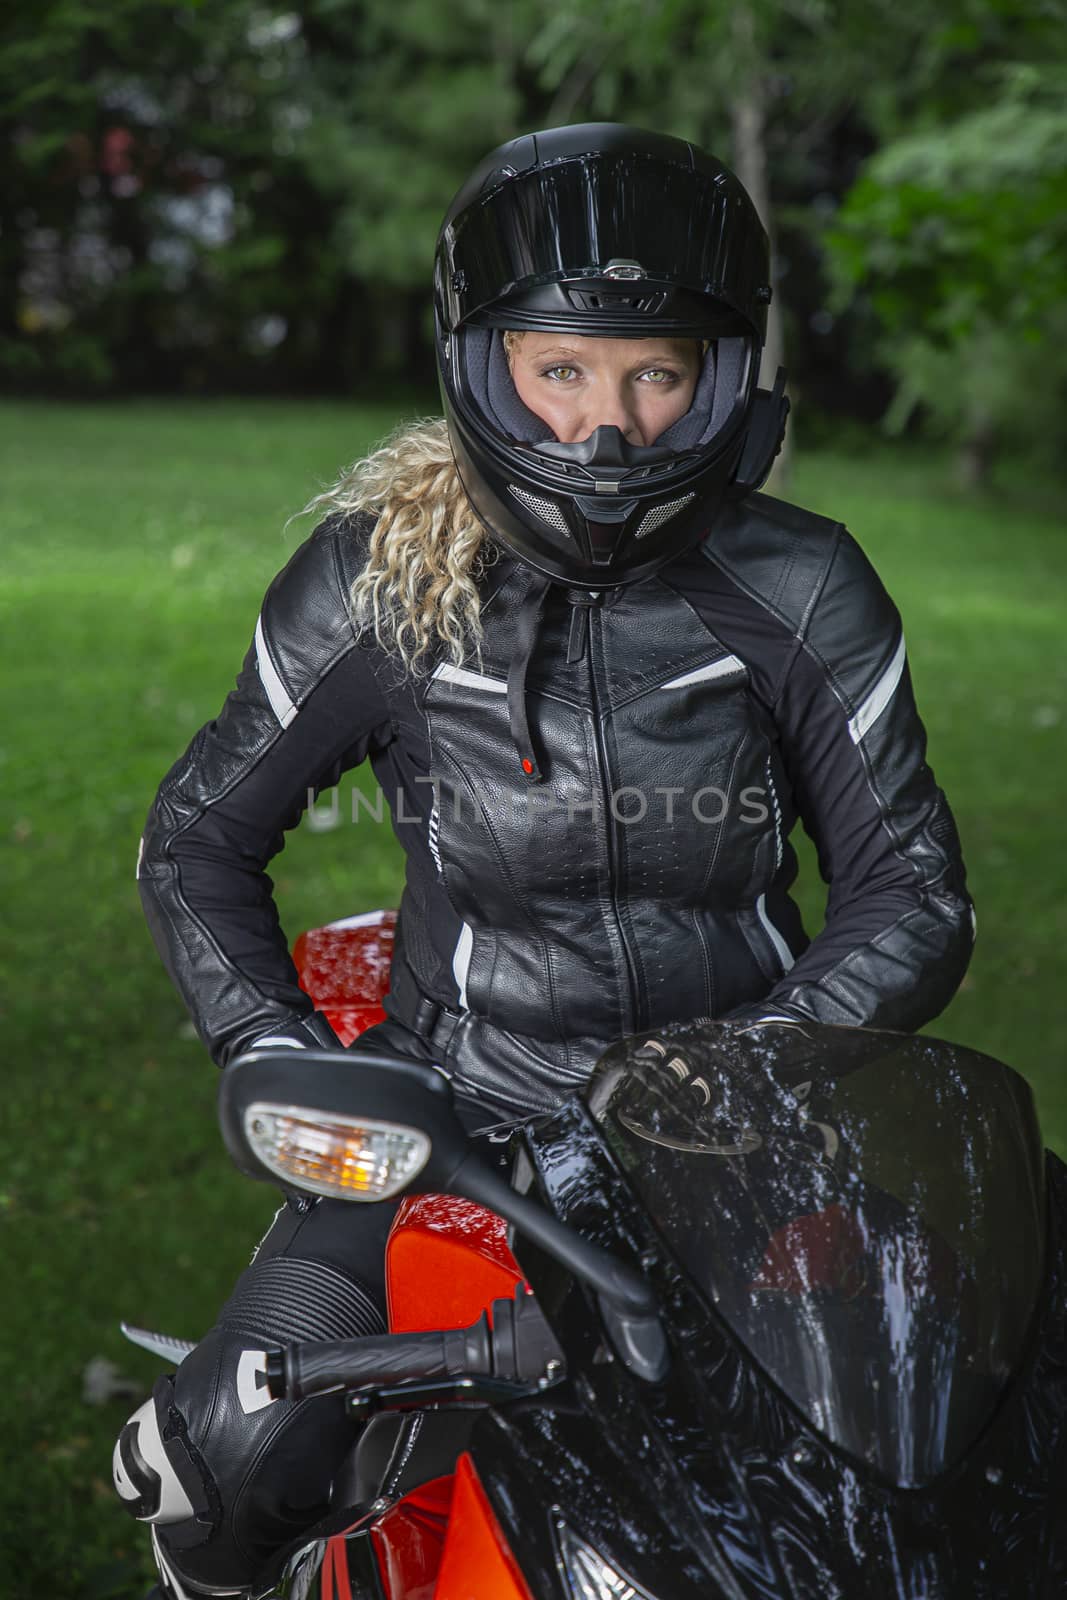 Twenty something woman, wearing full motocyclist outfit, sitting on a sport motocycle